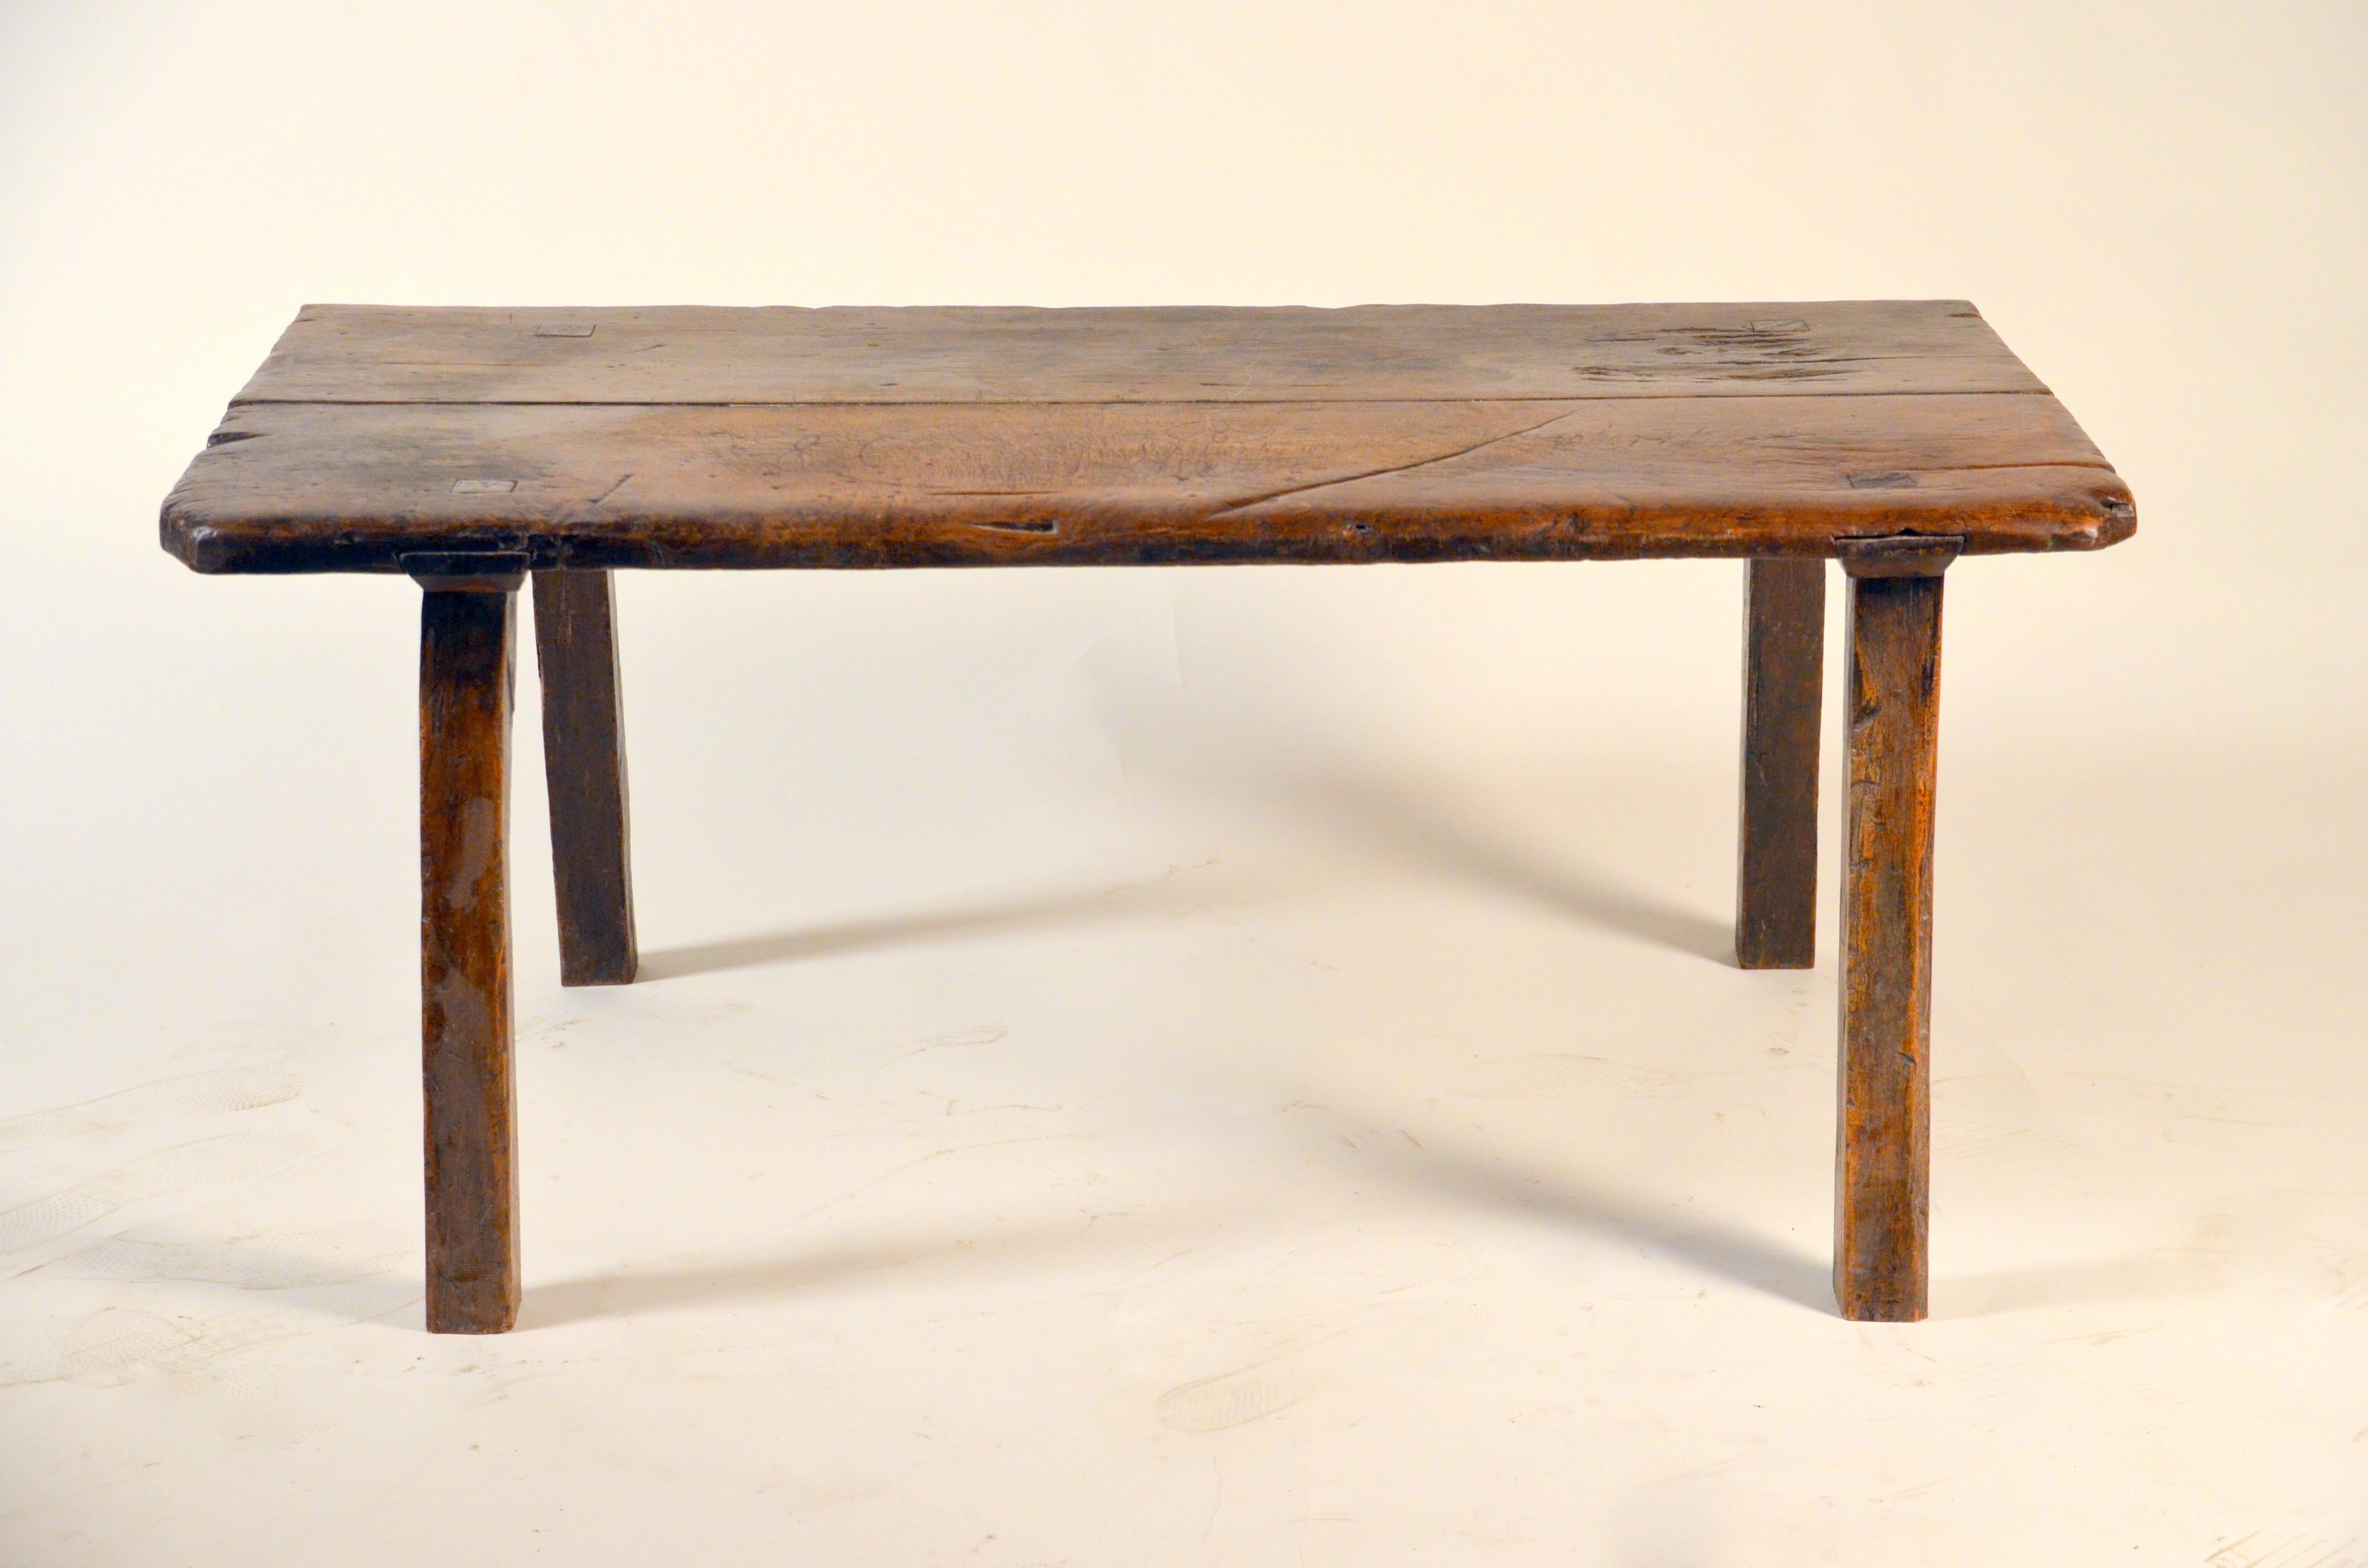 Beautiful Wabi coffee table. Hardwood slab with amazing patina. 4 angled legs.

The last 2 photos are to give an idea of the table in a project setting.